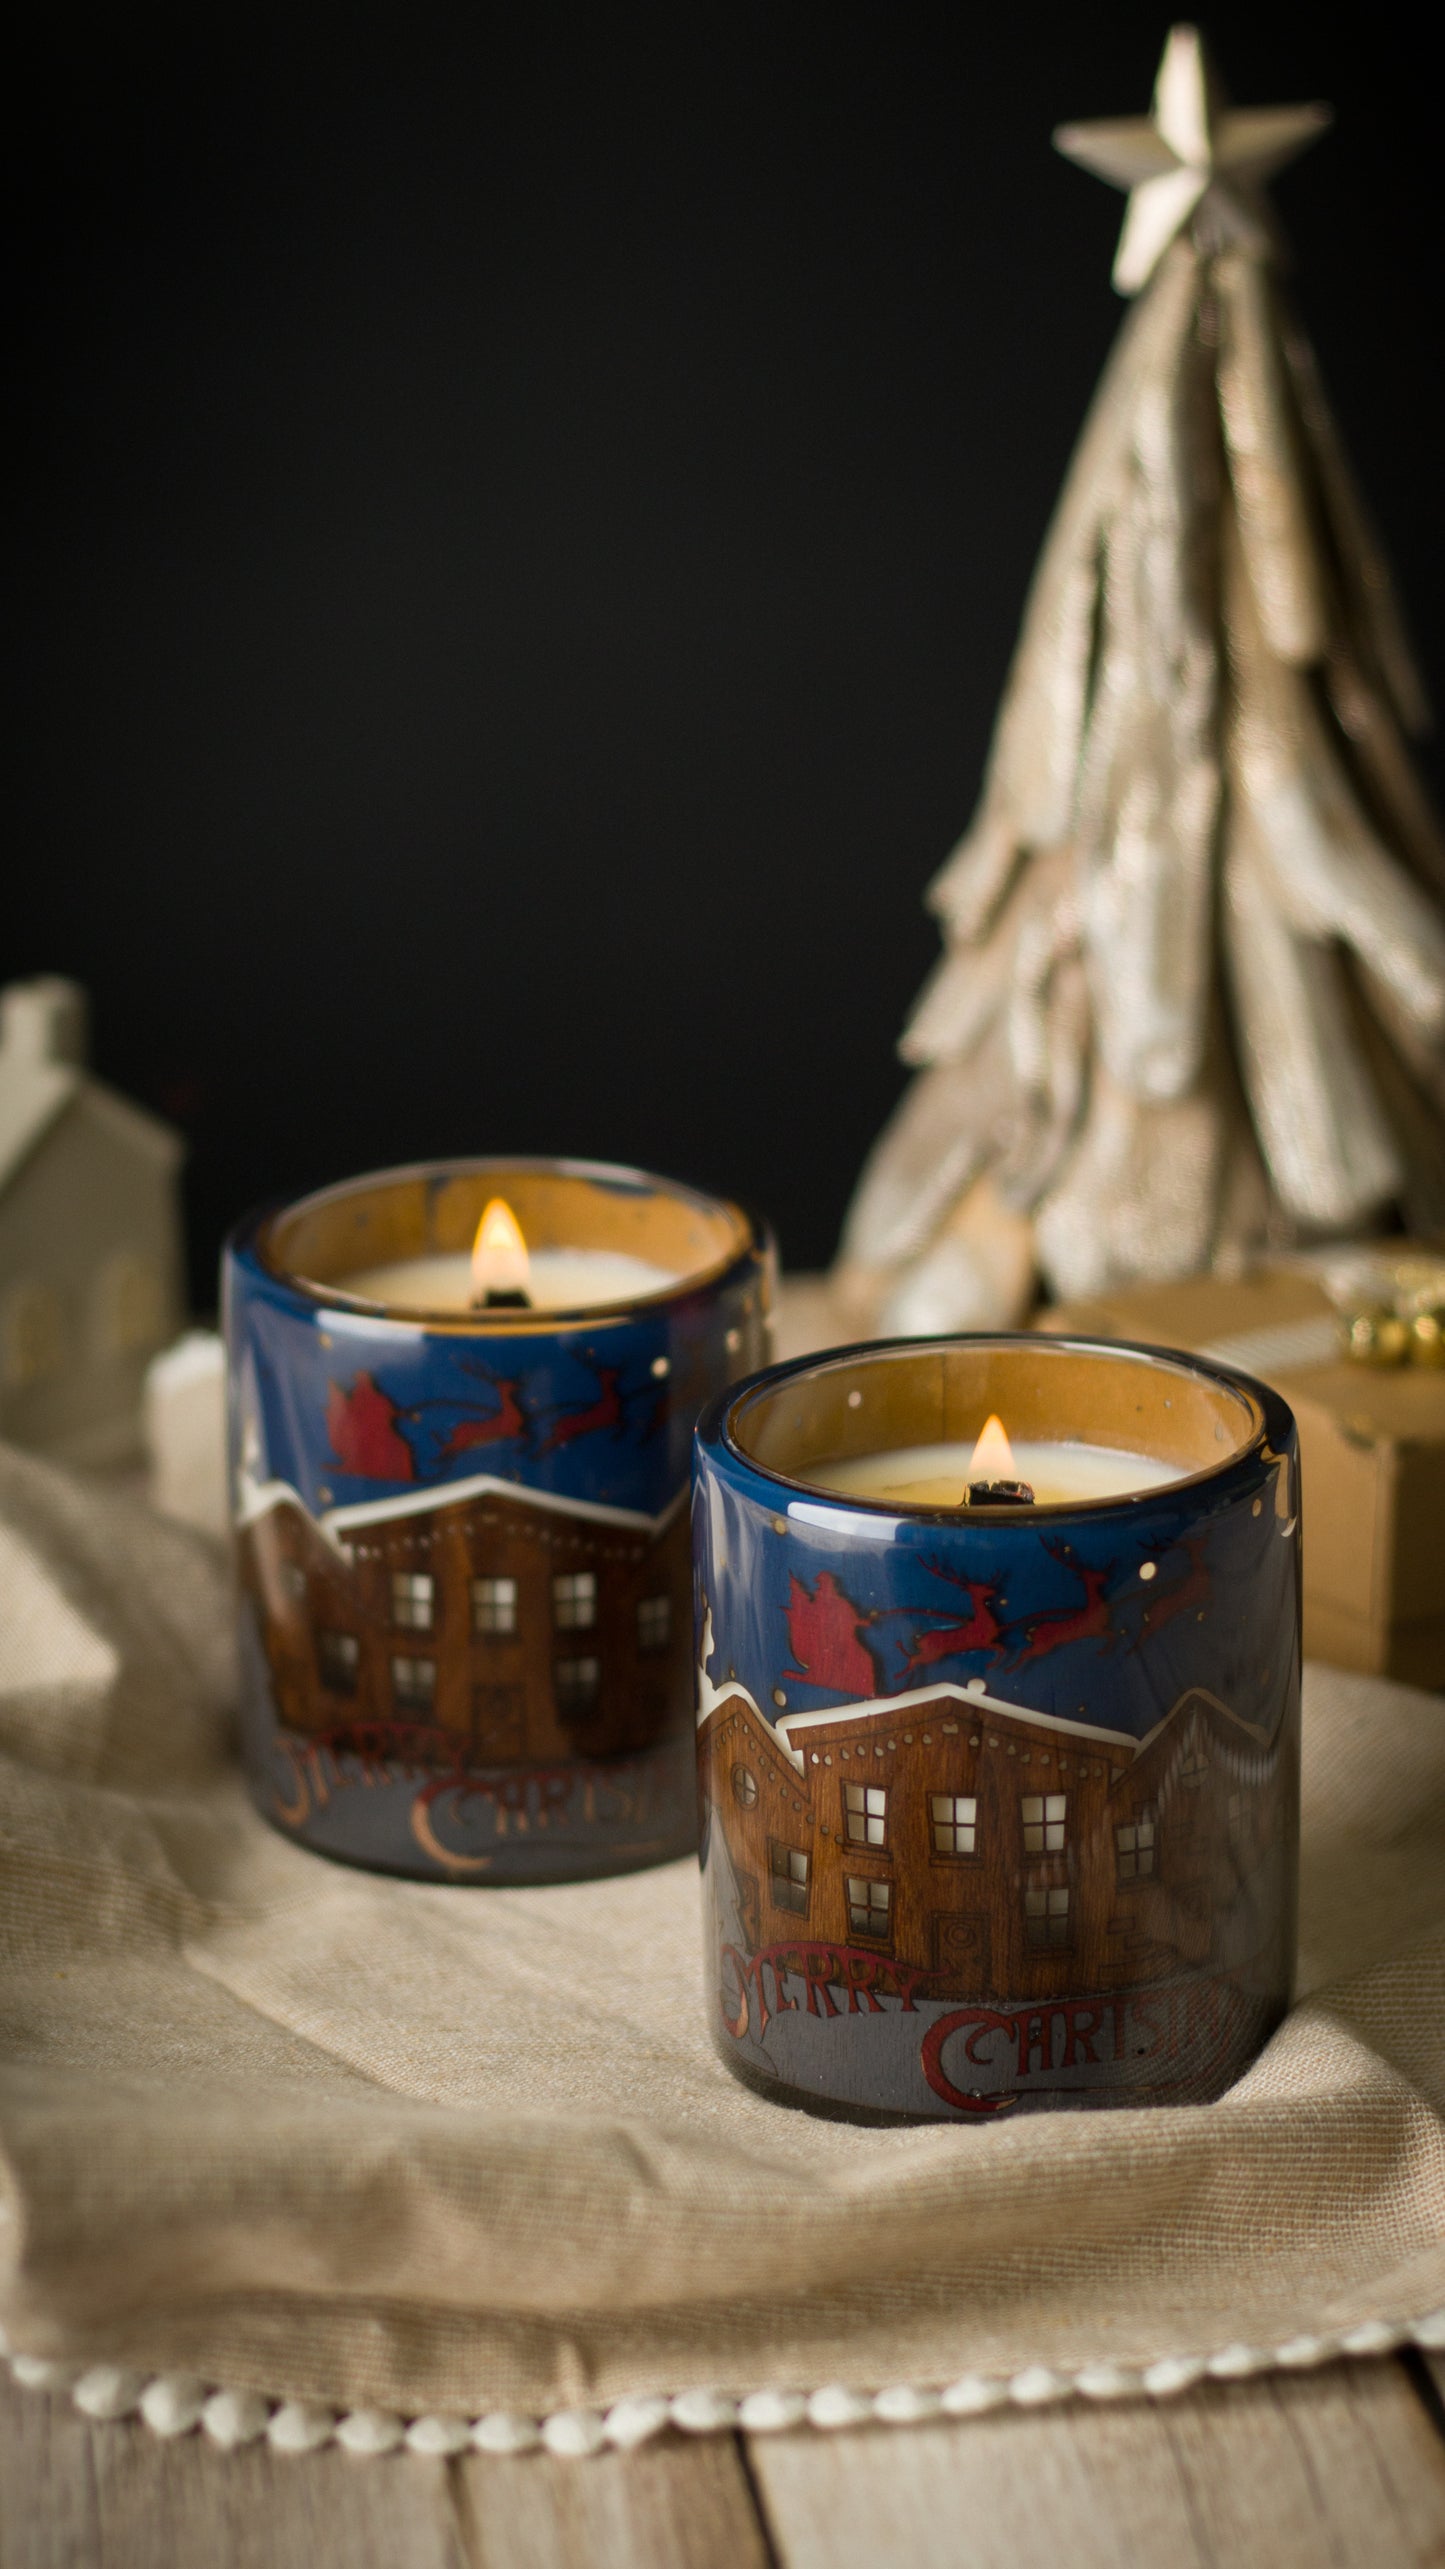 Soy Candle in Handmade Candlestick "Christmas"